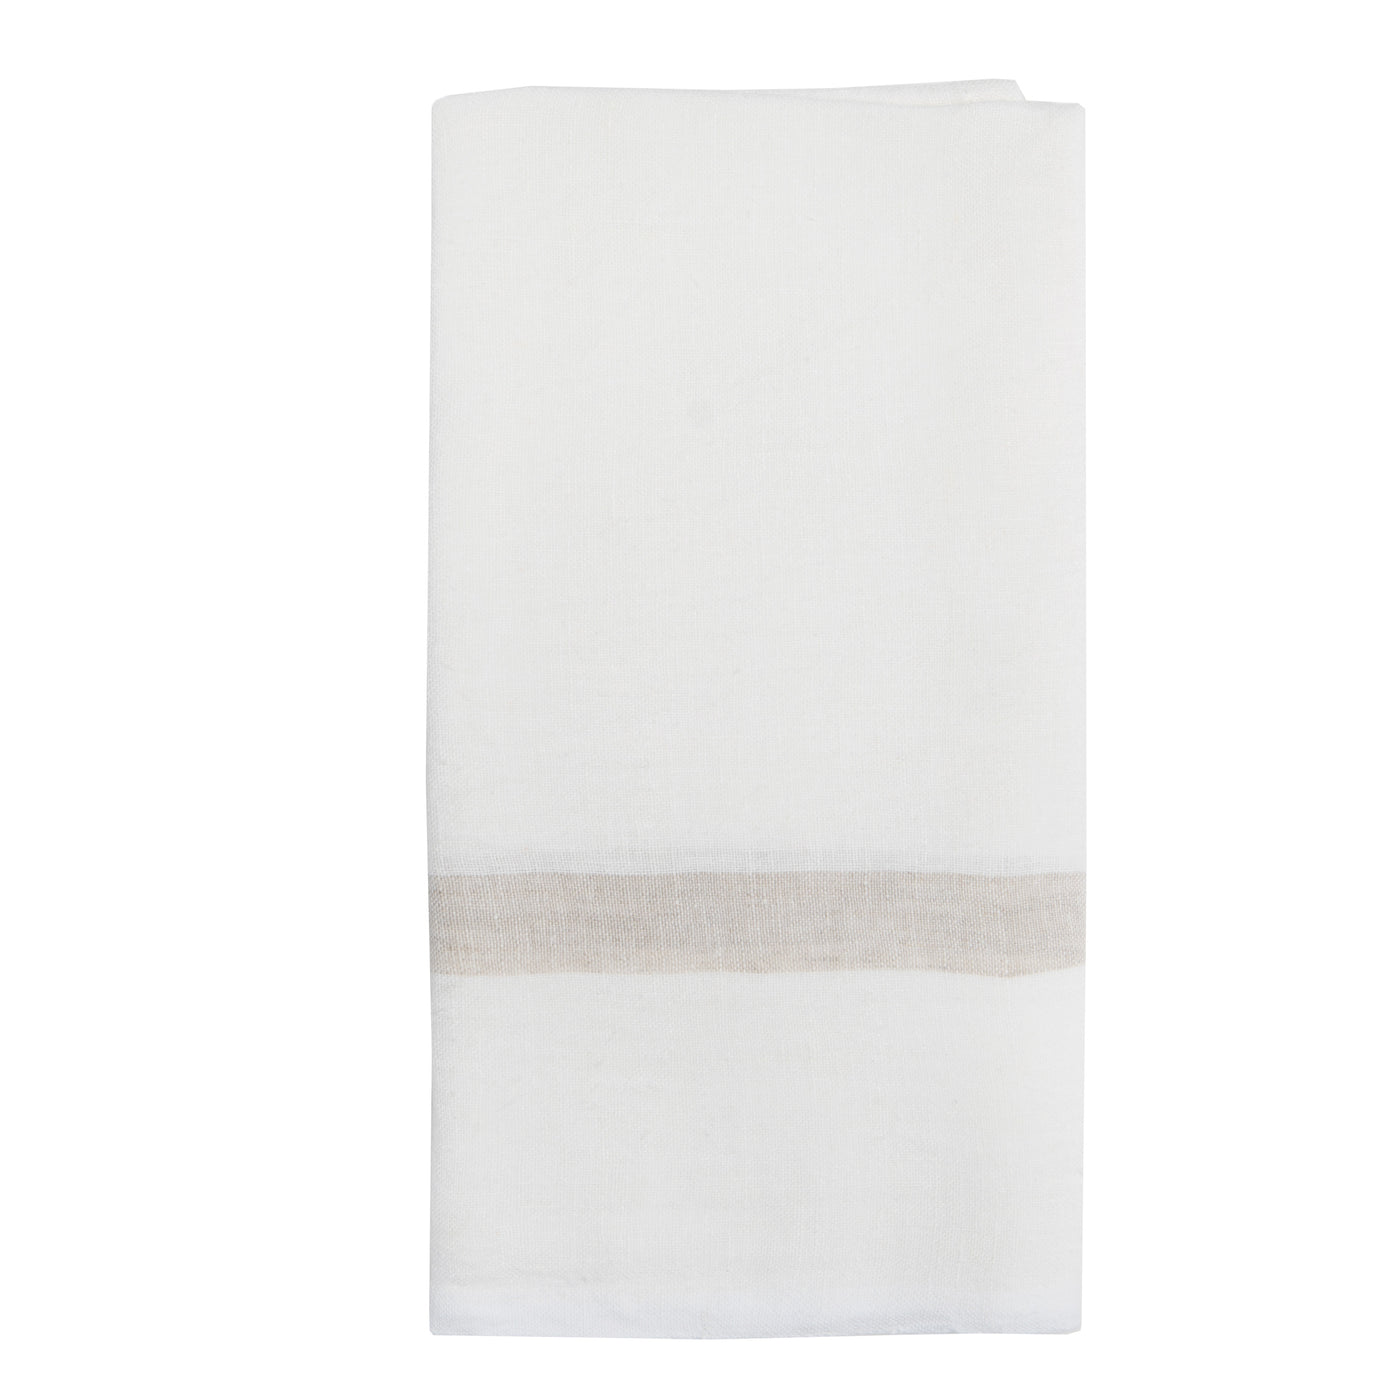 Laundered Linen Kitchen Towels White & Natural, Set of 2